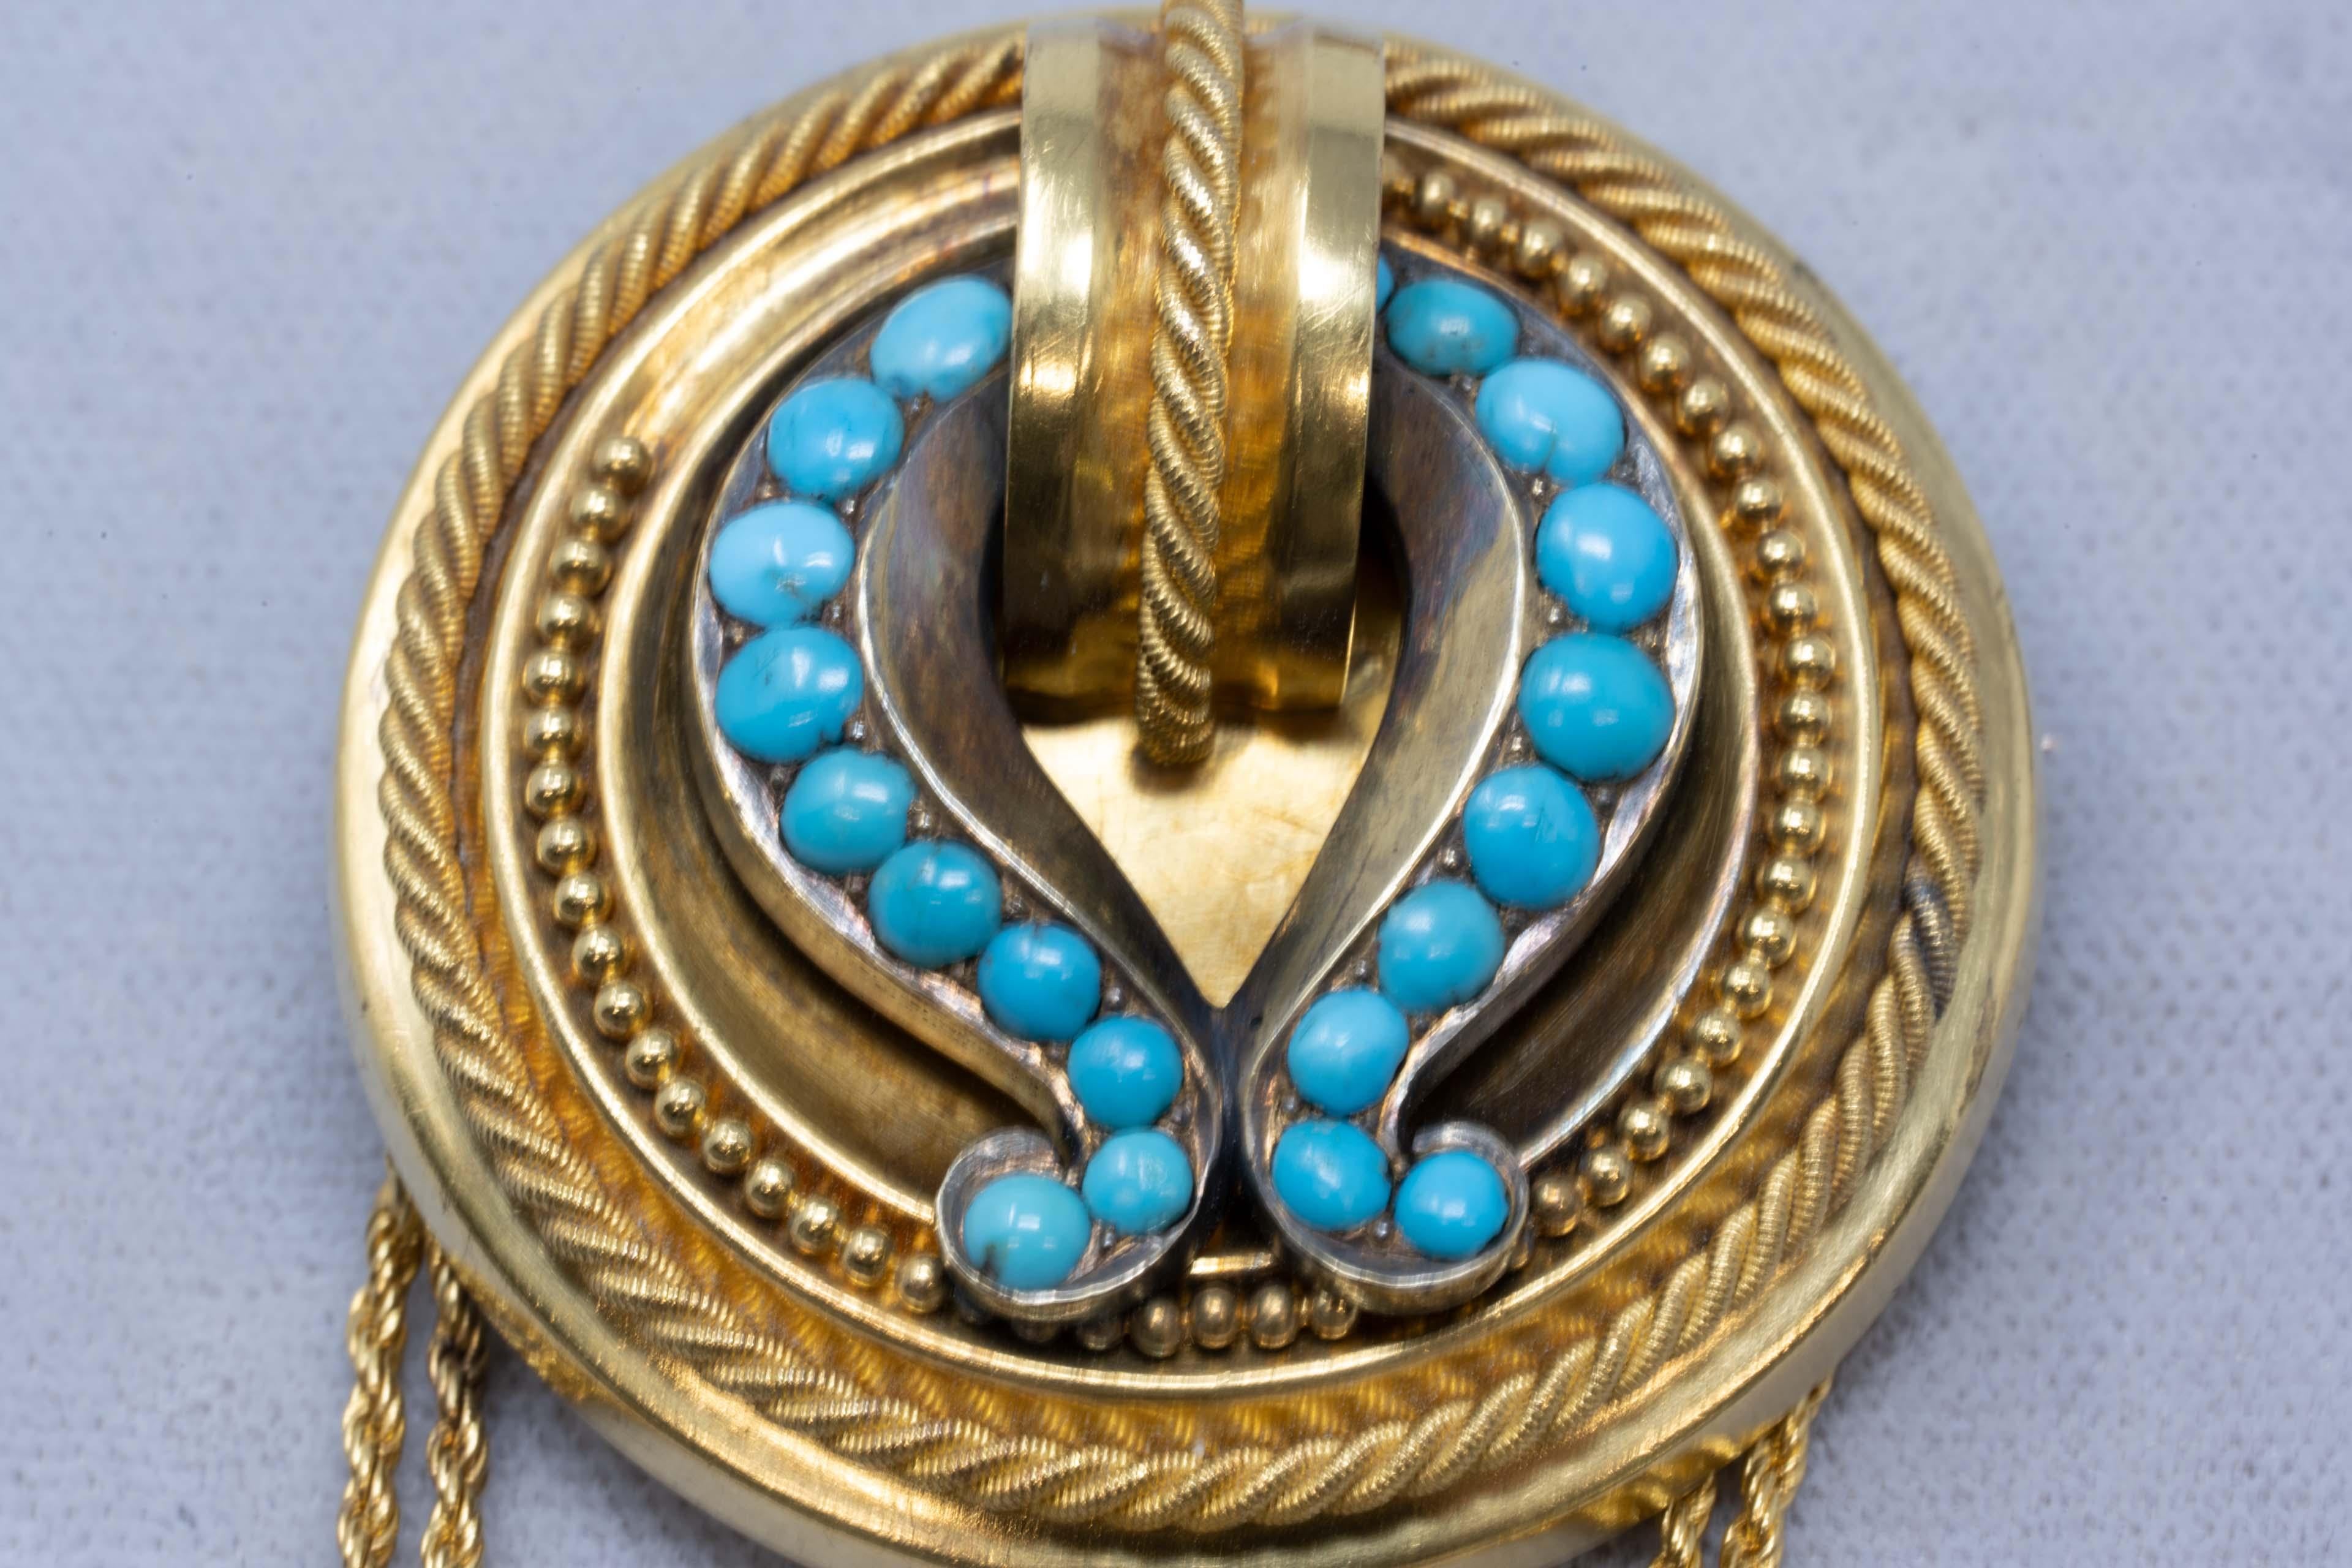 Authentic 1850's antique Victorian 15k yellow gold (tested) and turquoise brooch and earrings set. Exceptional handmade set Etruscan Revival style, brooch measures 3 1/8 inches long x 1 5/8 inches in diameter. Earrings measure 2 1/8 inches long x